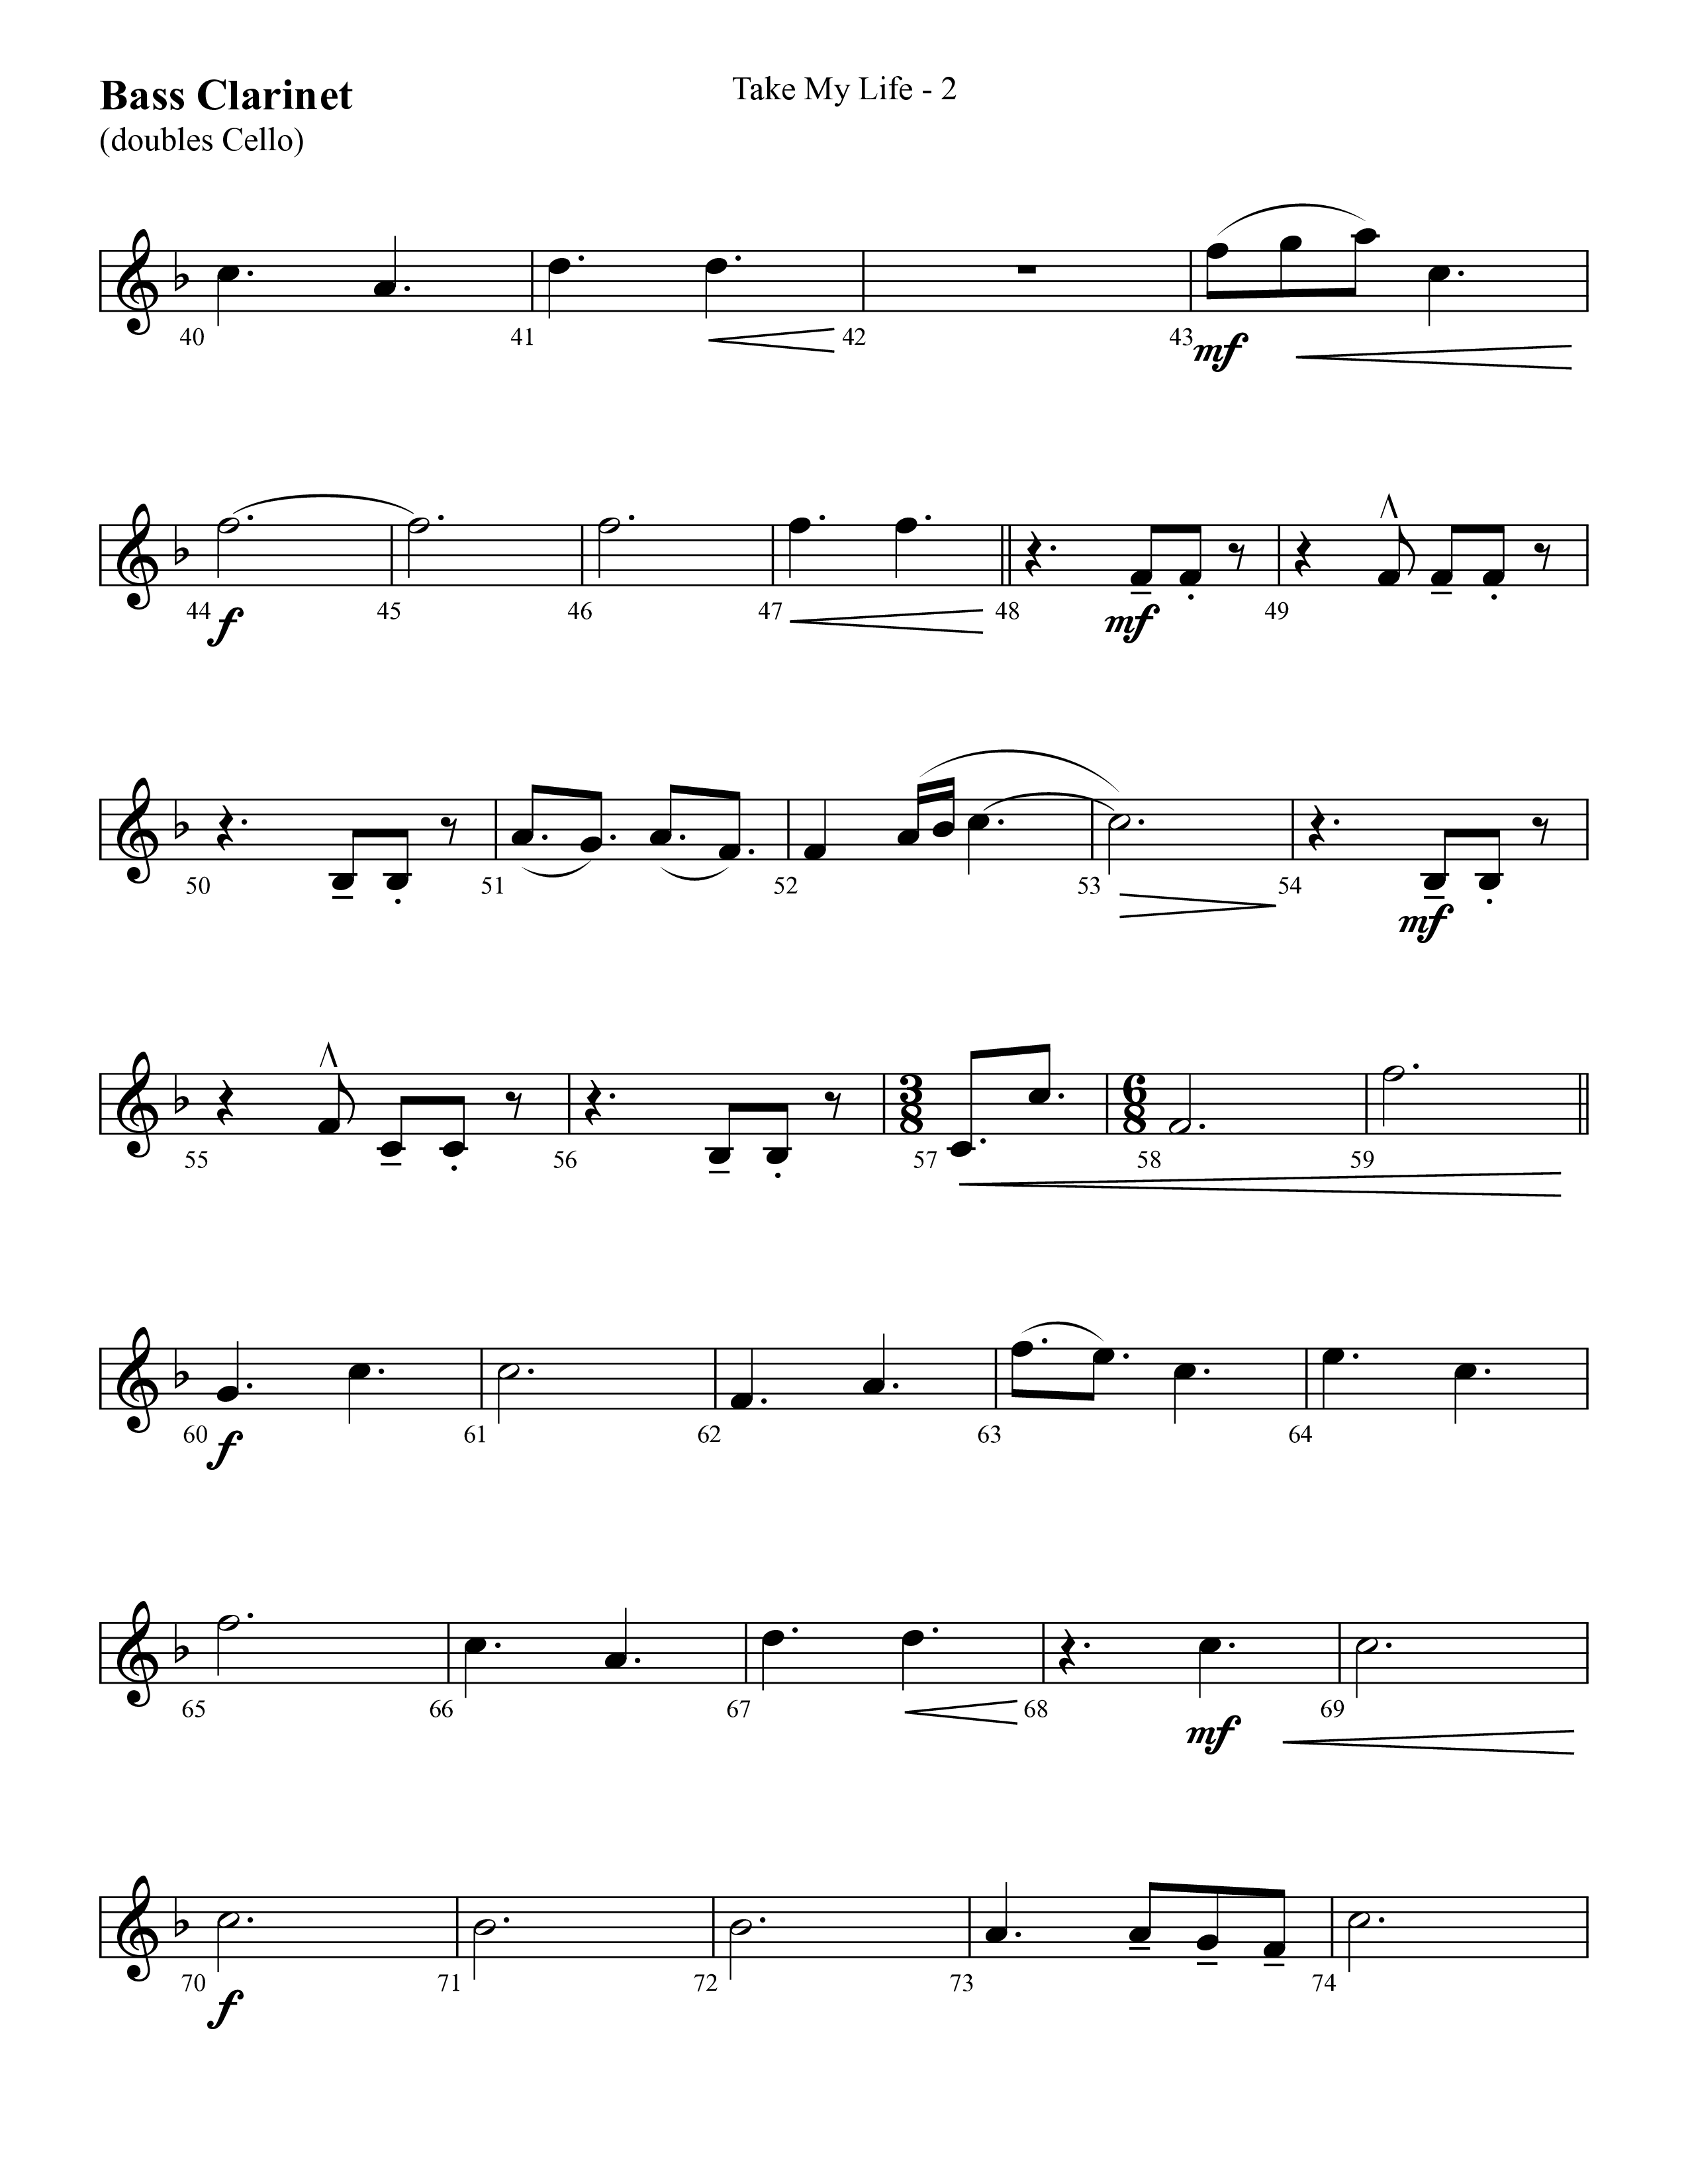 Take My Life (with Take My Life And Let It Be, Take My Life) (Choral Anthem SATB) Bass Clarinet (Lifeway Choral / Arr. Cliff Duren)